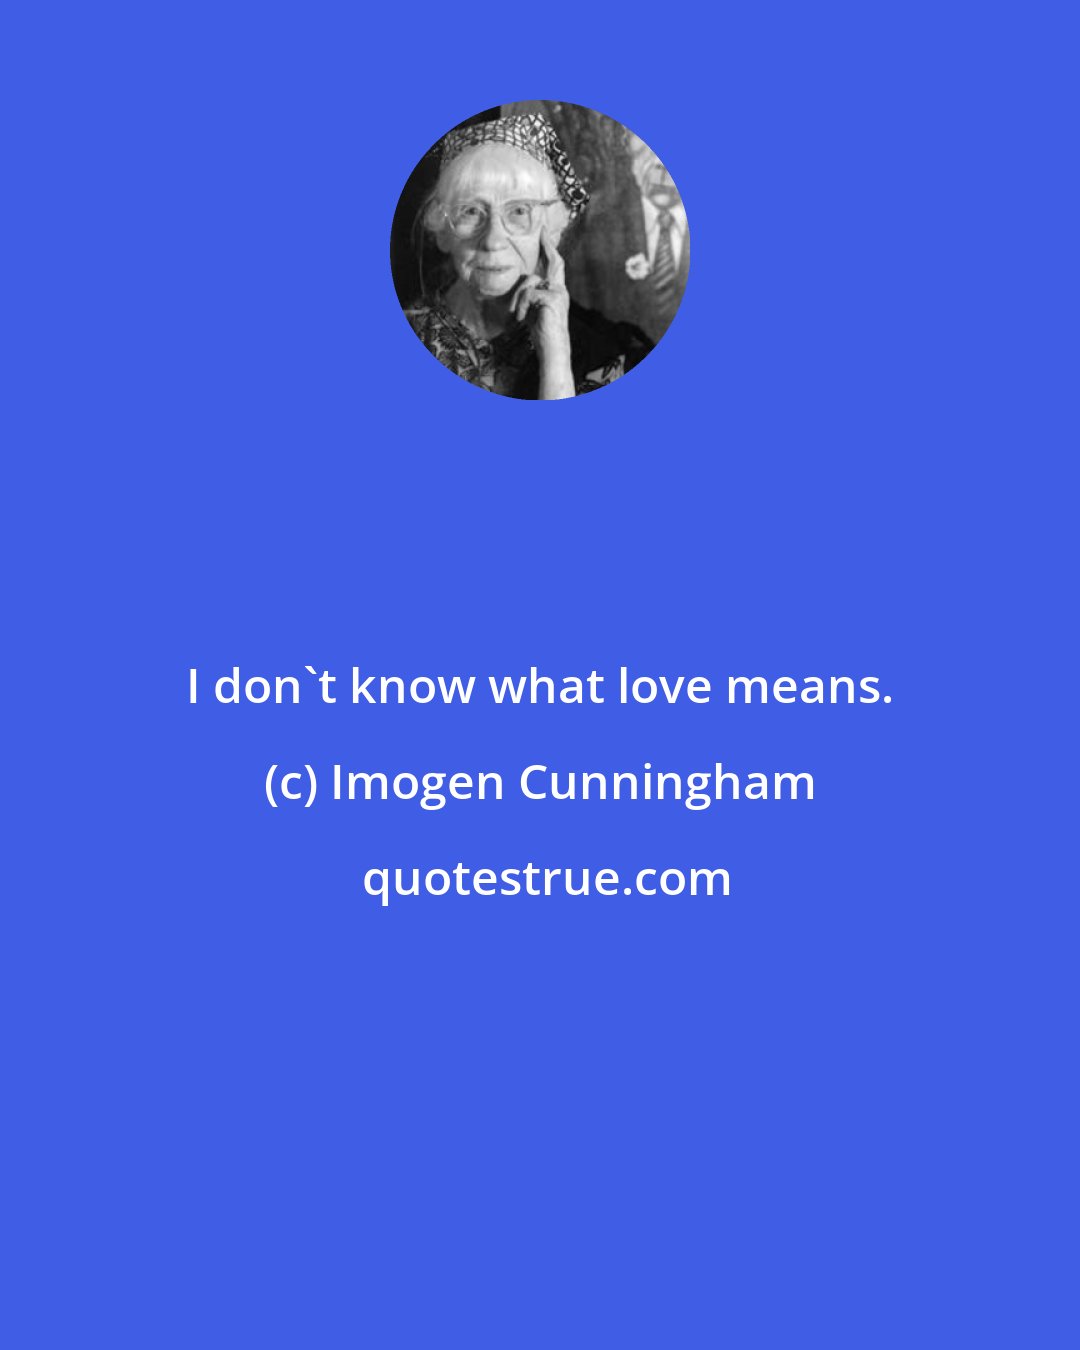 Imogen Cunningham: I don't know what love means.